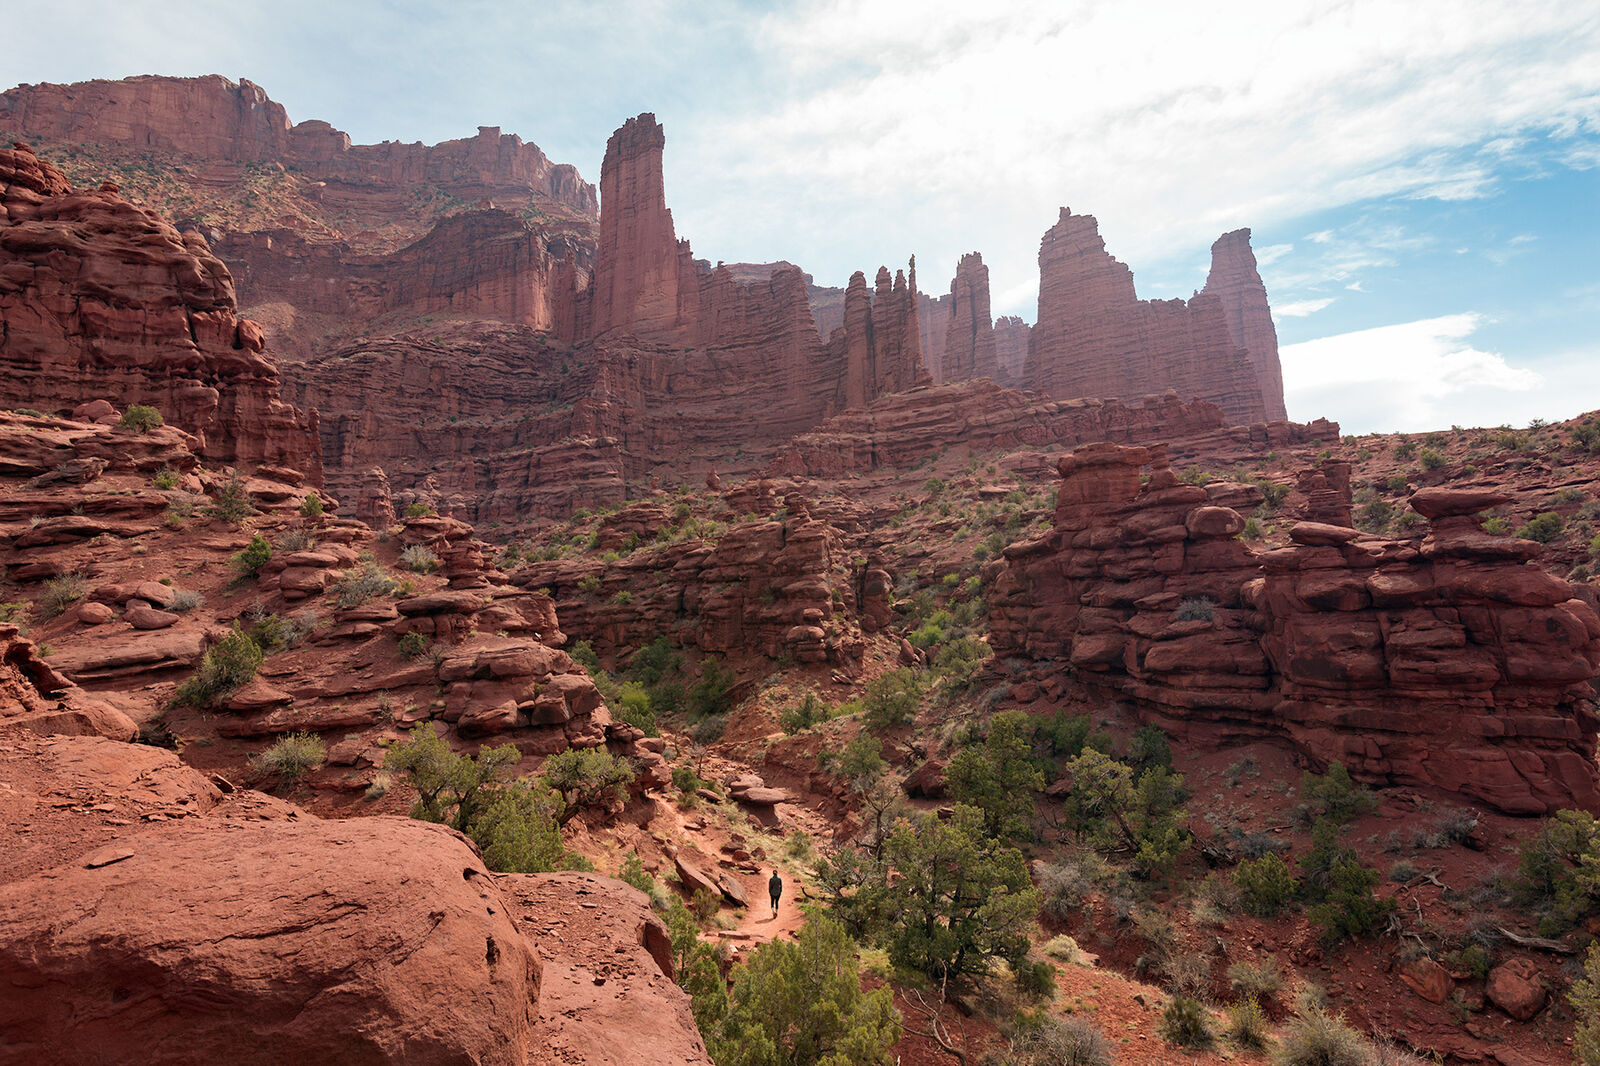 Landscape-oriented color photograph. A sprawling expanse of sandstone towers and rock formations stretches from just below the top of the frame at the left towards the middle of the frame at the right. Started at the bottom left of the frame a hiking trail can be seen in the distance, leading towards the center of the frame, where a lone hiker can just be made out on the trail. The sandstone is varying shades of brown and red, and the landscape is sprinkled with green sage and juniper bushes. At the center of the frame near the top half the tallest, proudest desert towers stand like skyscrapers against the light blue sky, which is filled with soft white clouds. The sun is somewhere above the frame, creating a slight haze towards the top of the frame.